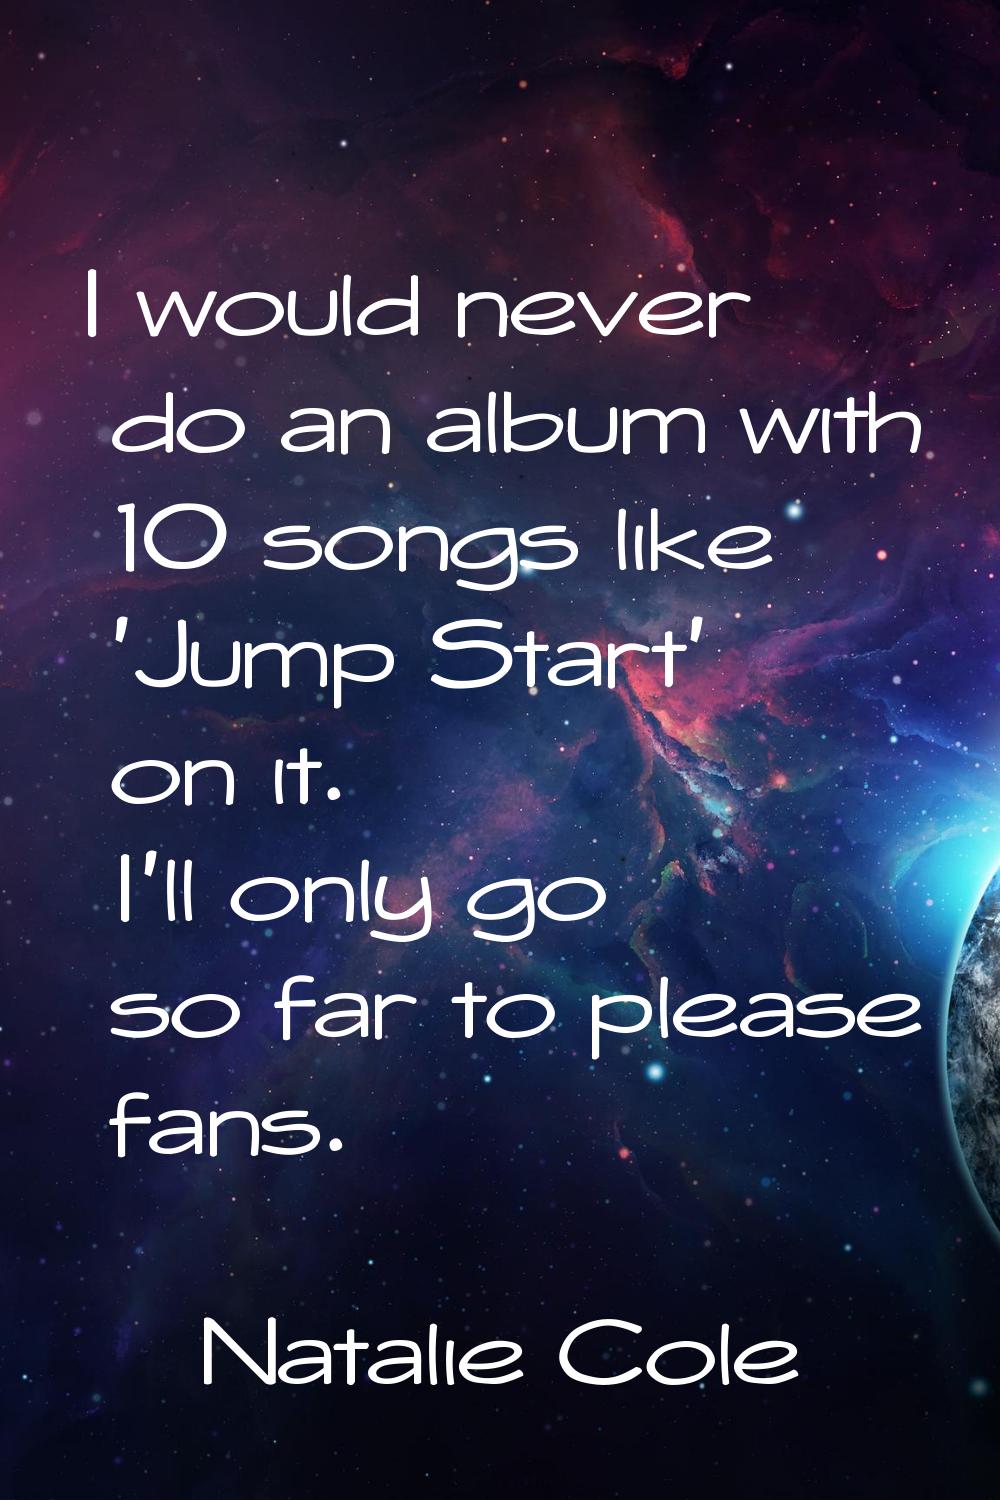 I would never do an album with 10 songs like 'Jump Start' on it. I'll only go so far to please fans